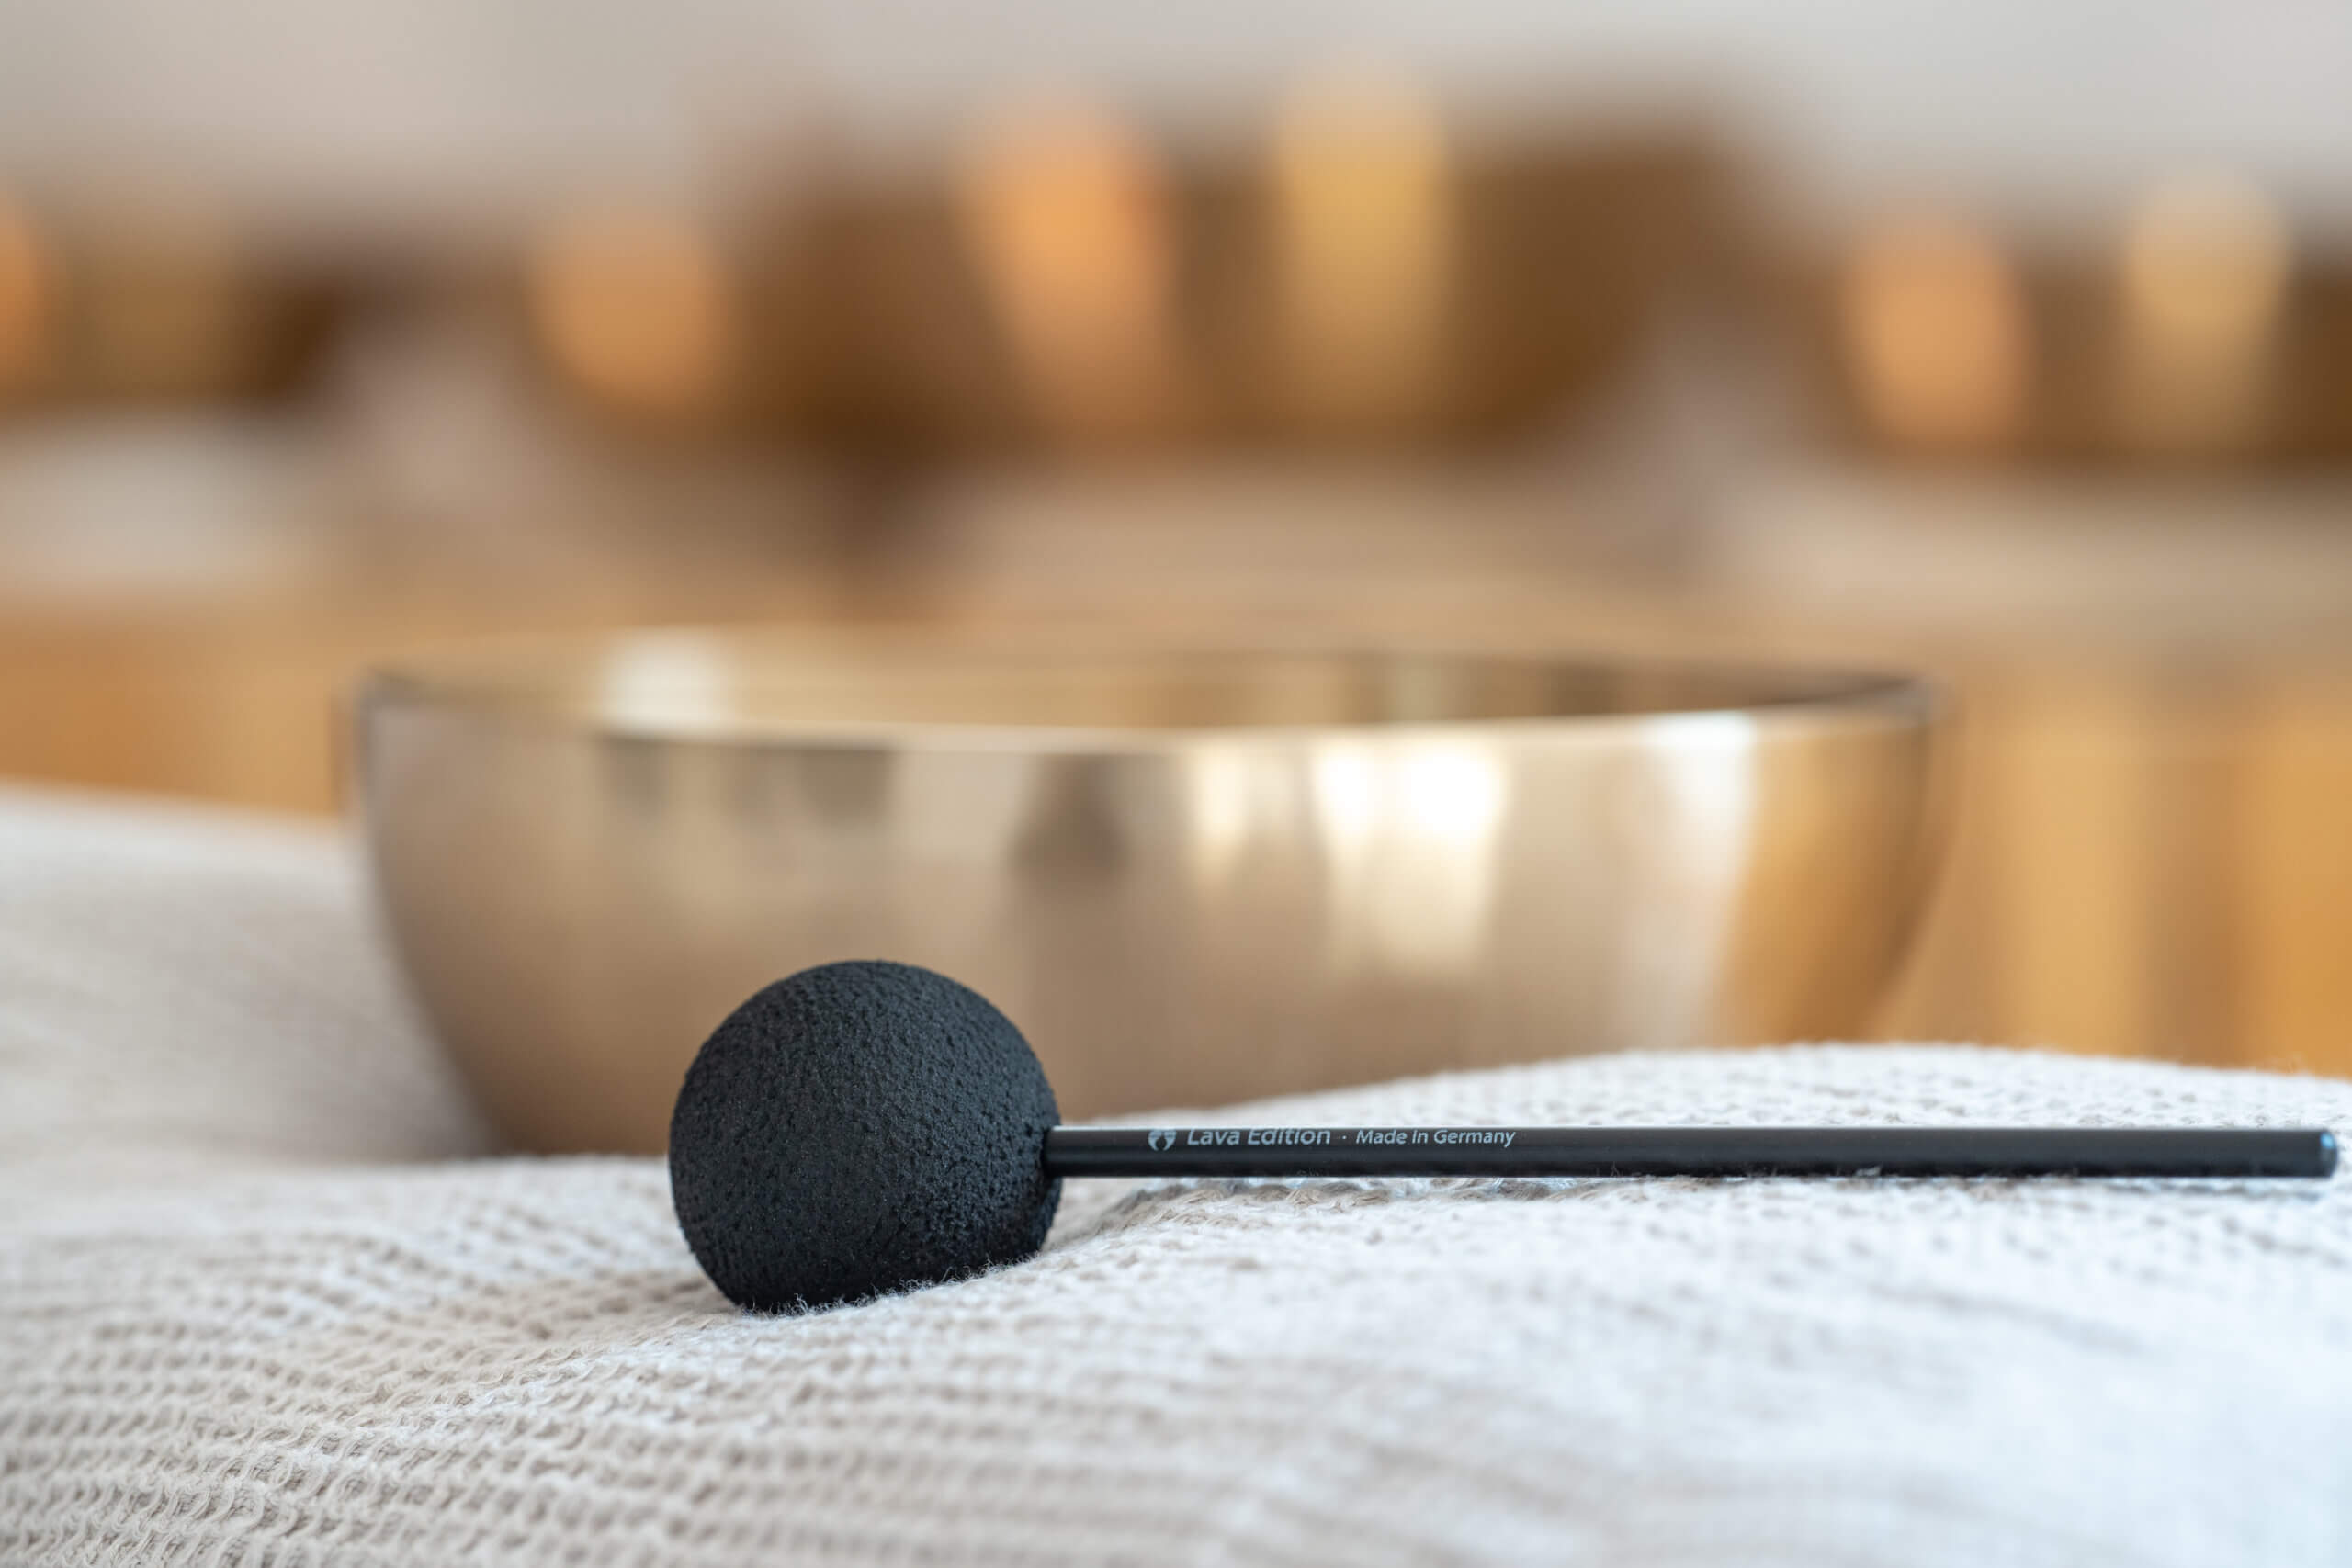 Using a singing bowl: How to use a mallet and grater correctly